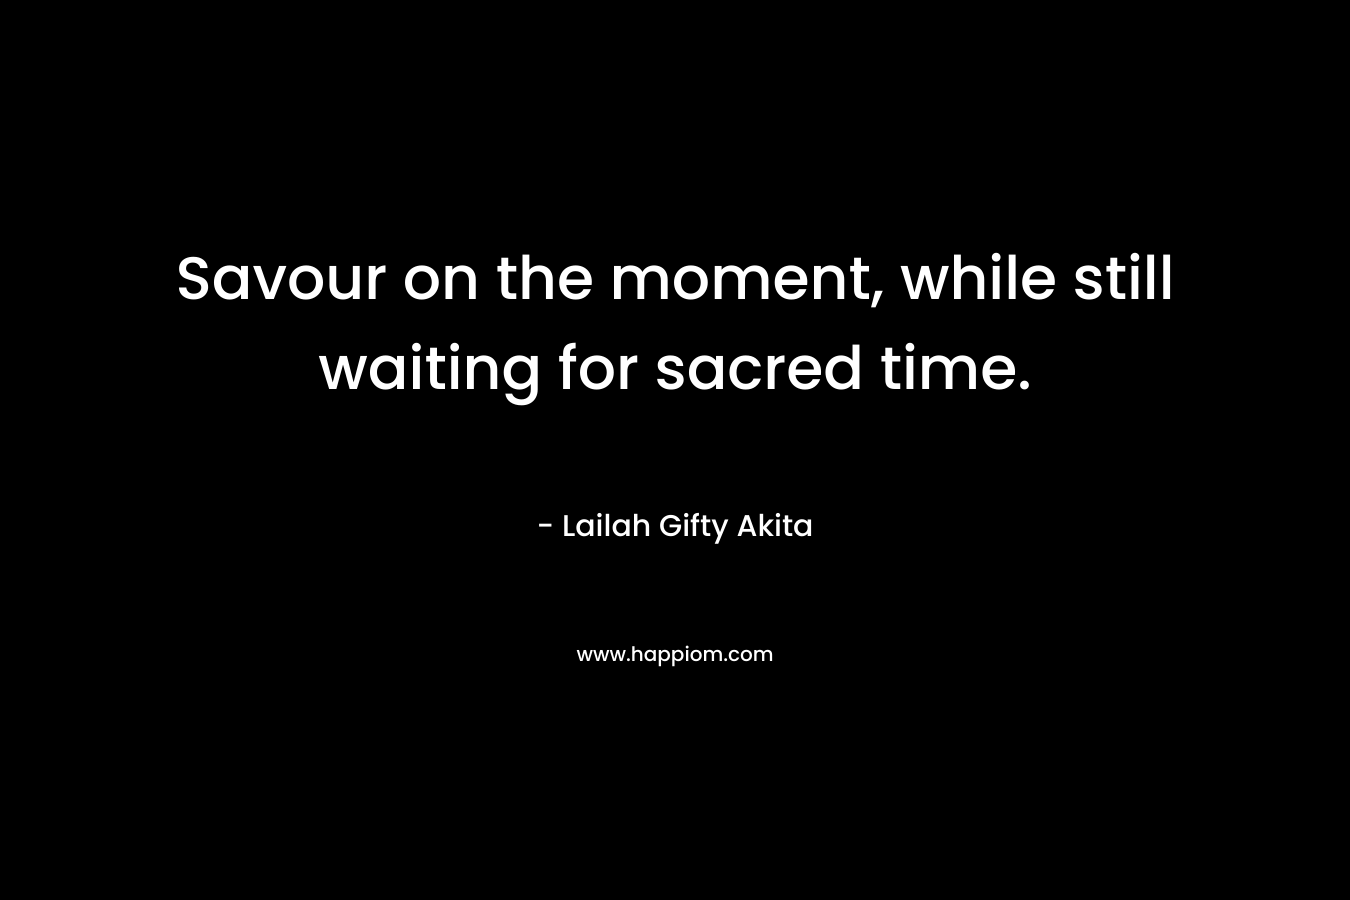 Savour on the moment, while still waiting for sacred time. – Lailah Gifty Akita